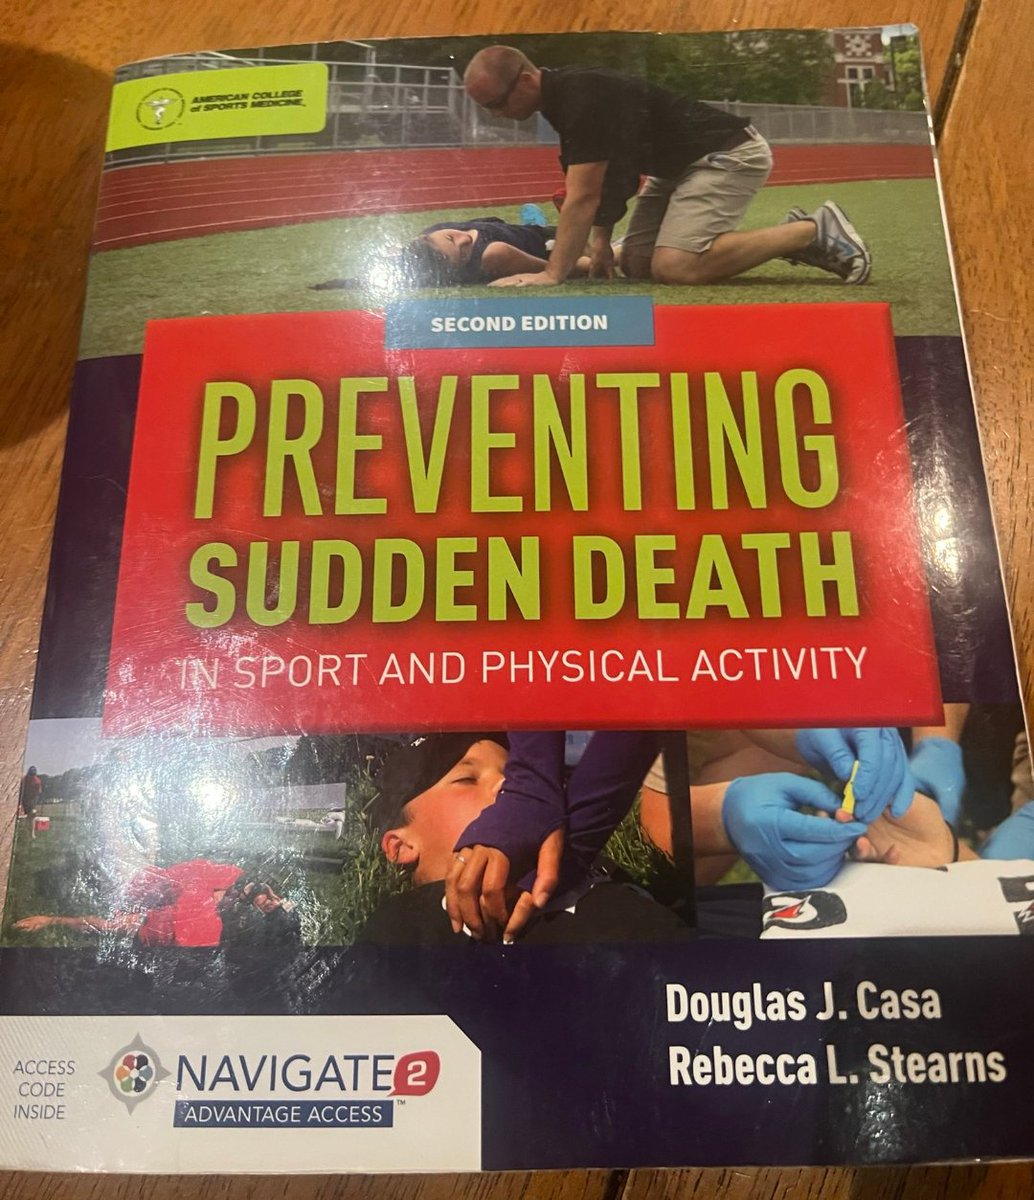 @kingdomgirl0418 @ErikDuvald @WHO @Kate_L_OBrien Sudden deaths are NOT a new phenomenon. 🙄
This book was published pre pandemic, for instance.